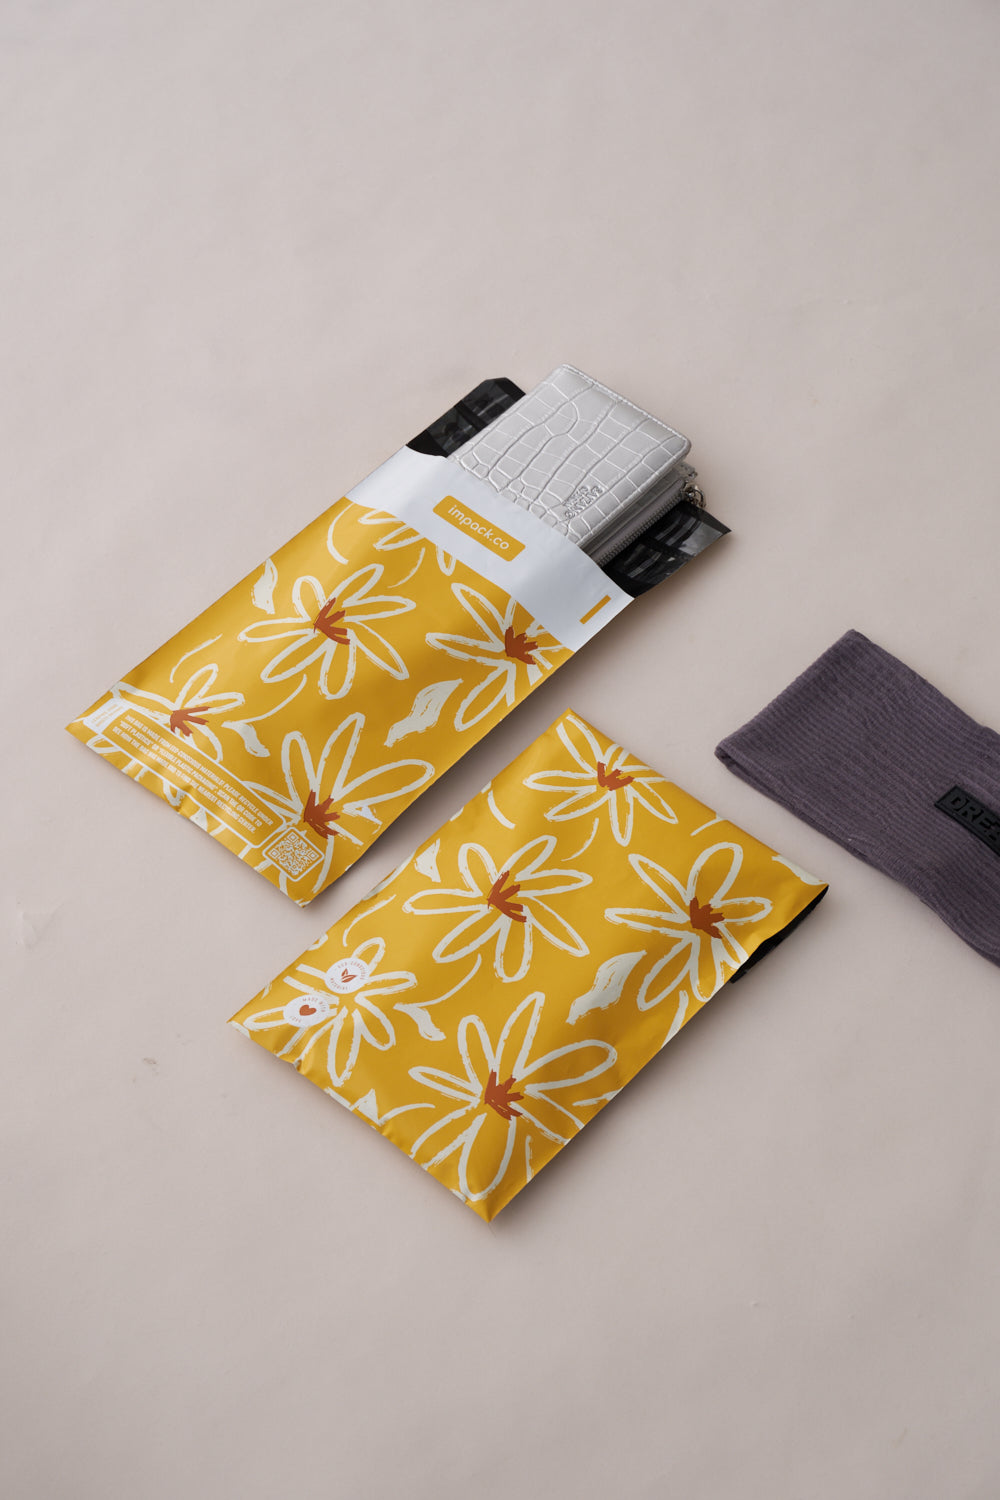 Two impack.co Golden Pencil Floral Mailers 6" x 9" containing items, one partly open showing a silver textured item inside. A gray rectangular cloth is placed to the right of the mailers, ensuring transit protection.